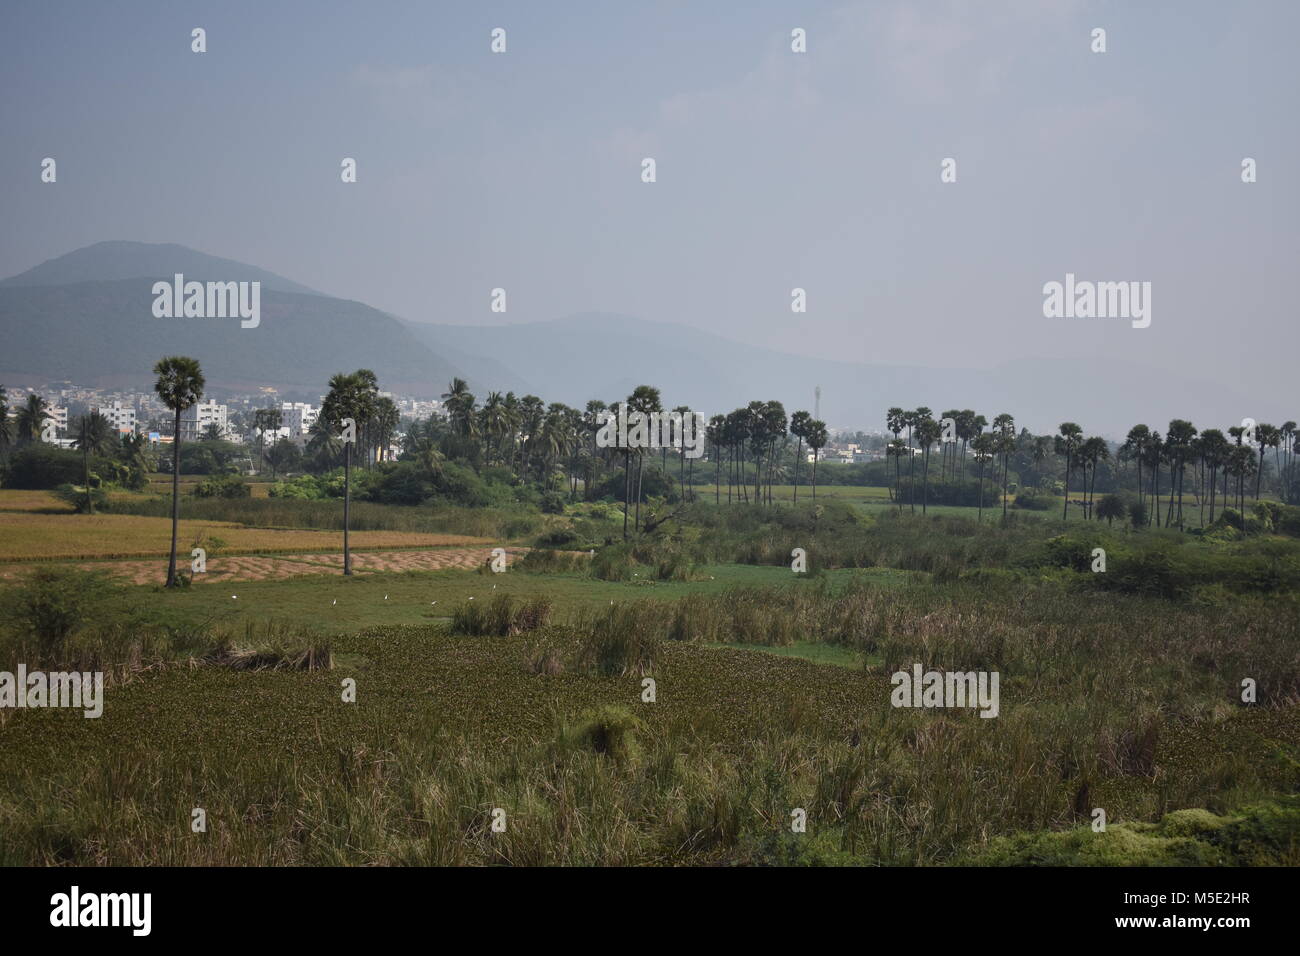 Beautiful scene of a paddy farming field with lot of palm trees plantations near by fields. Stock Photo